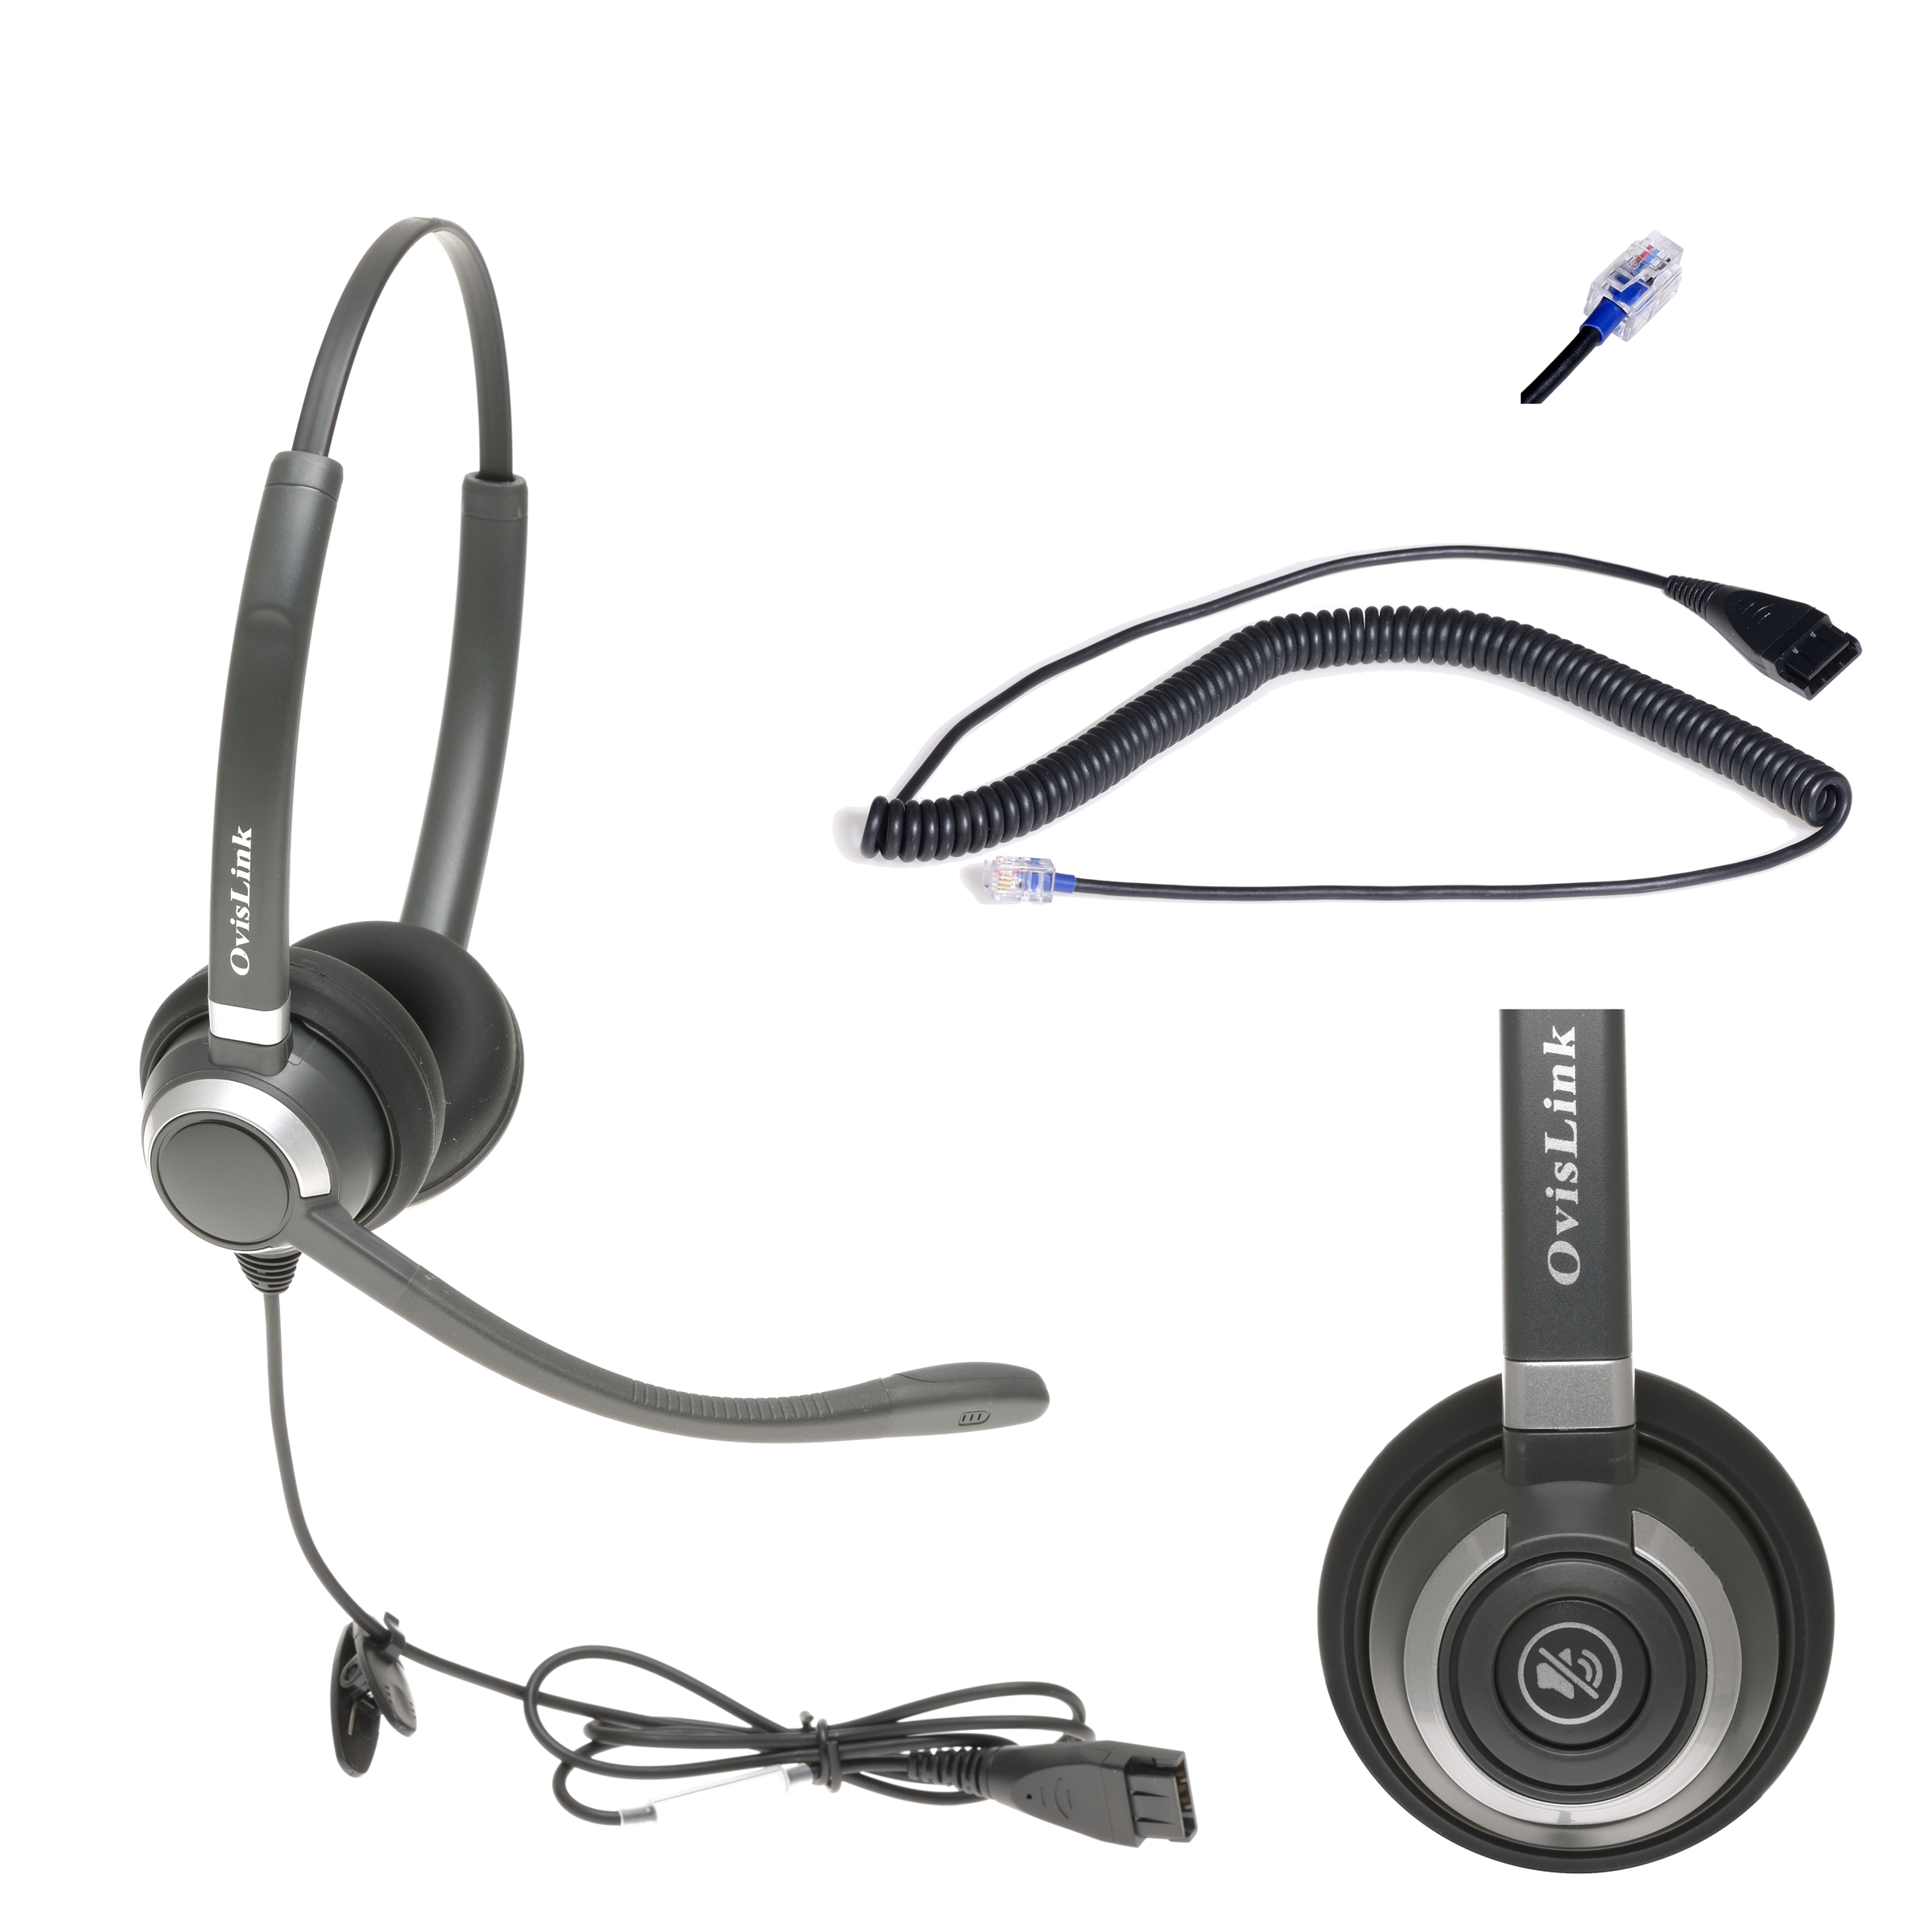 Mitel phone headset with single ear dual ear interchangeable function. HD  voice quality and noise free. Super smooth silicone ear cushions